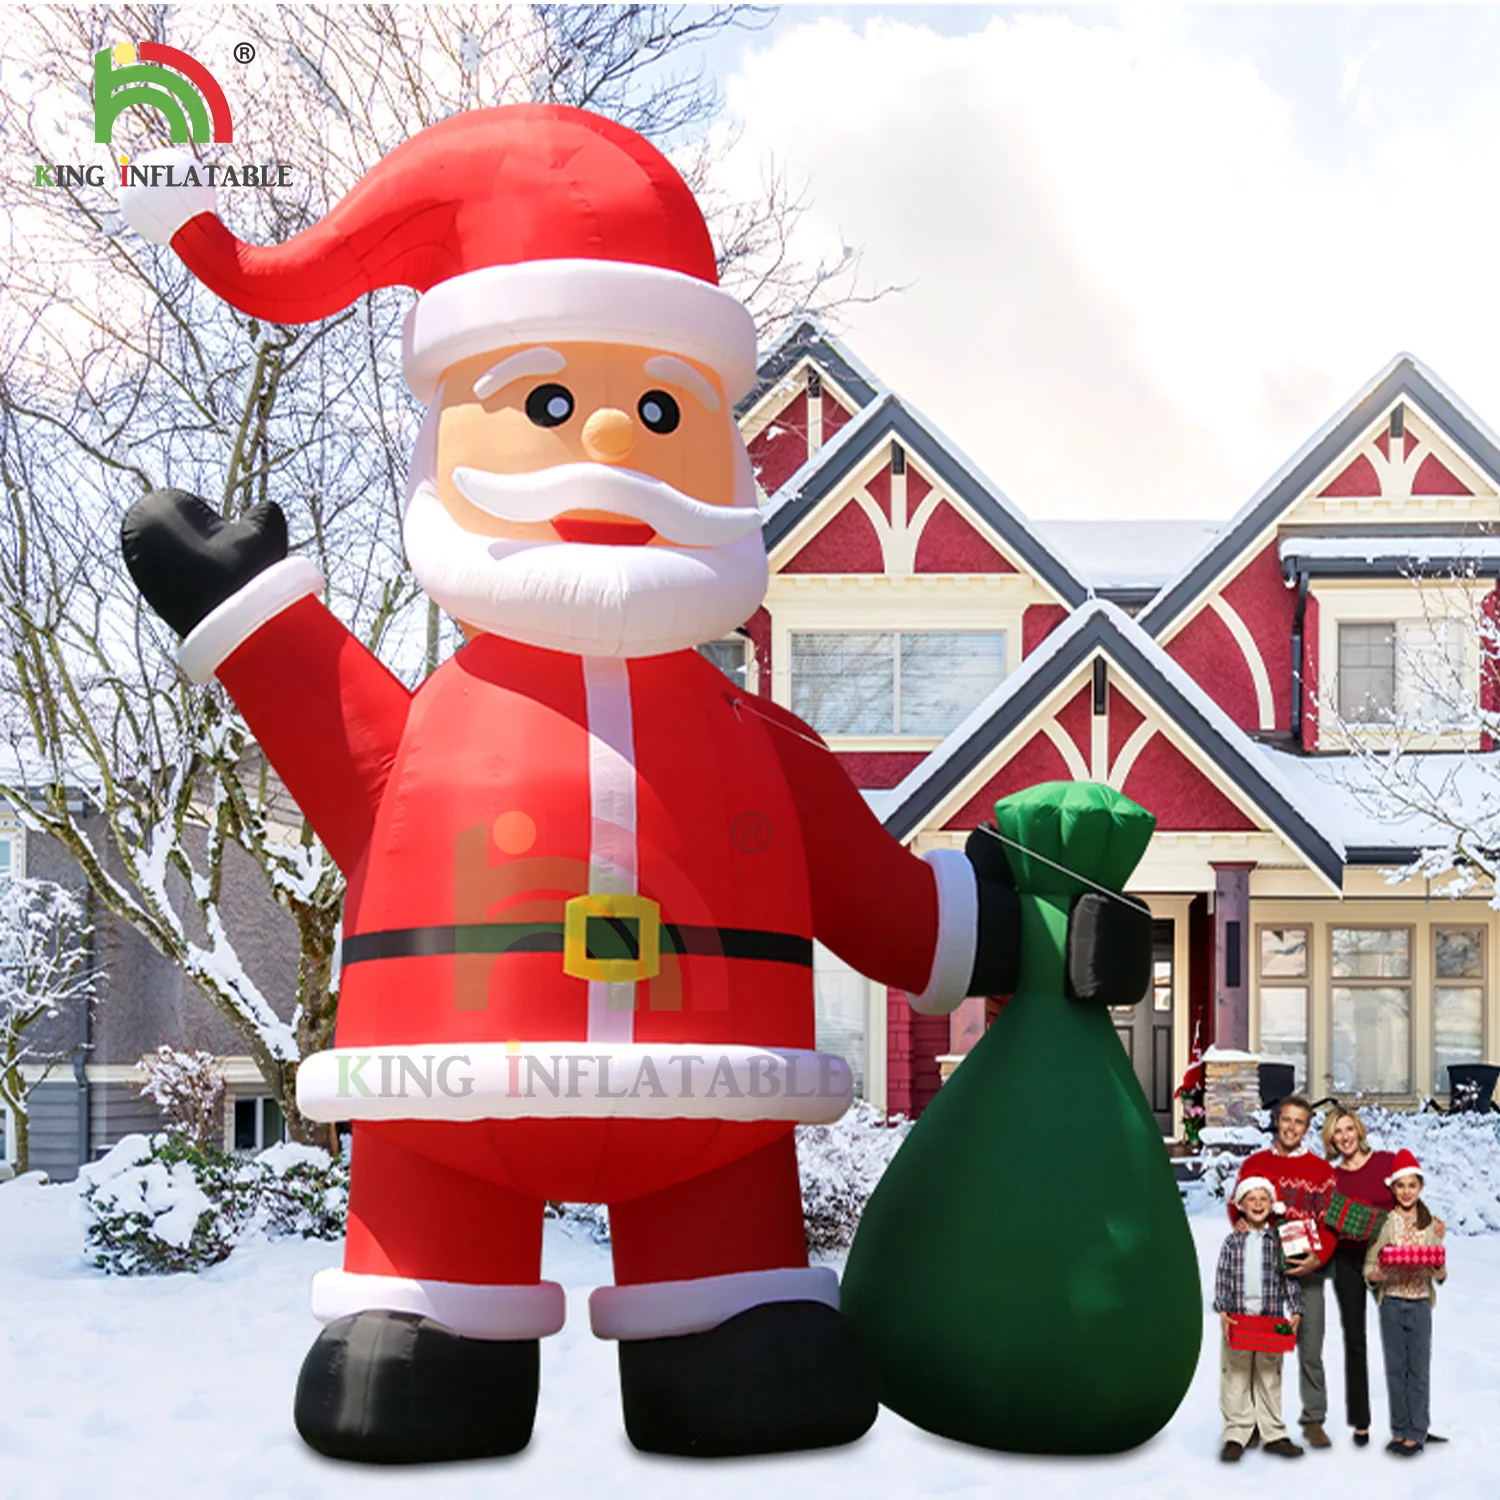 new year holidays blow up 20ft giant inflatable snowman frozen olaf for backyard festival christmas decorations 20/26/33ft Giant Inflatable Santa Claus Outdoors Christmas Father Decorations Festival Party Xmas Celebration With Blower Oxford